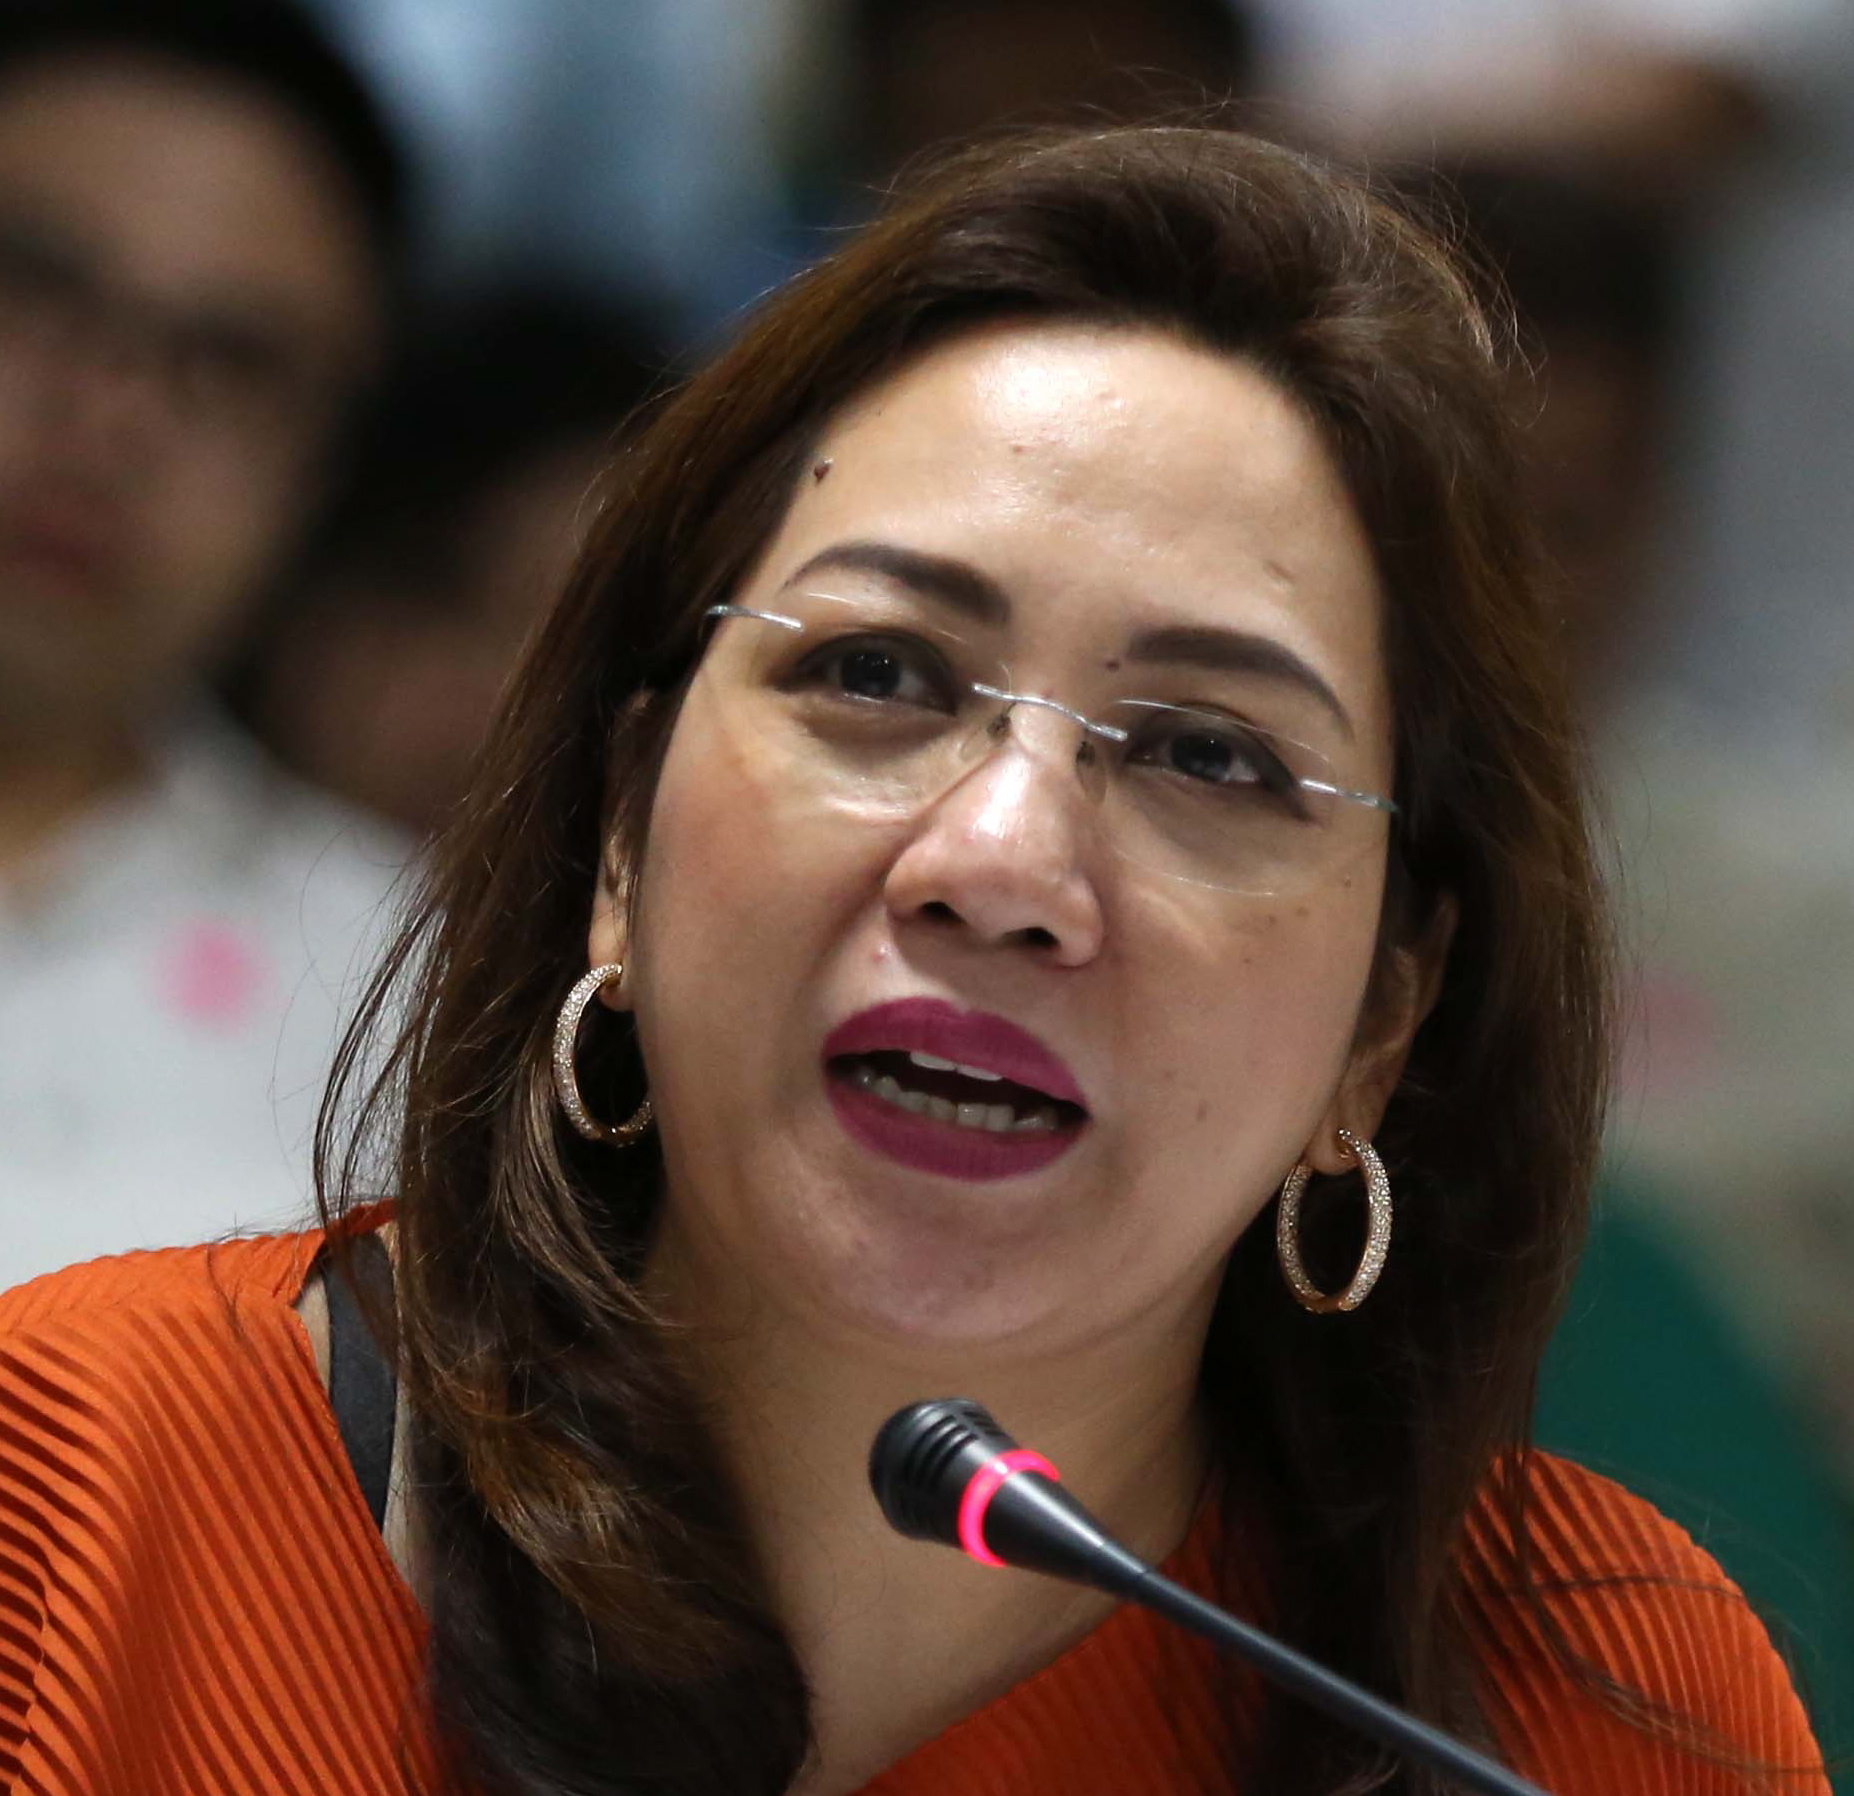 The reemergence of pertussis or whooping cough, along with other ailments that are easily preventable through vaccinations, is an offshoot of the past administration’s lapses, former Health secretary and Iloilo 1st District Rep. Janette Garin said on Monday.